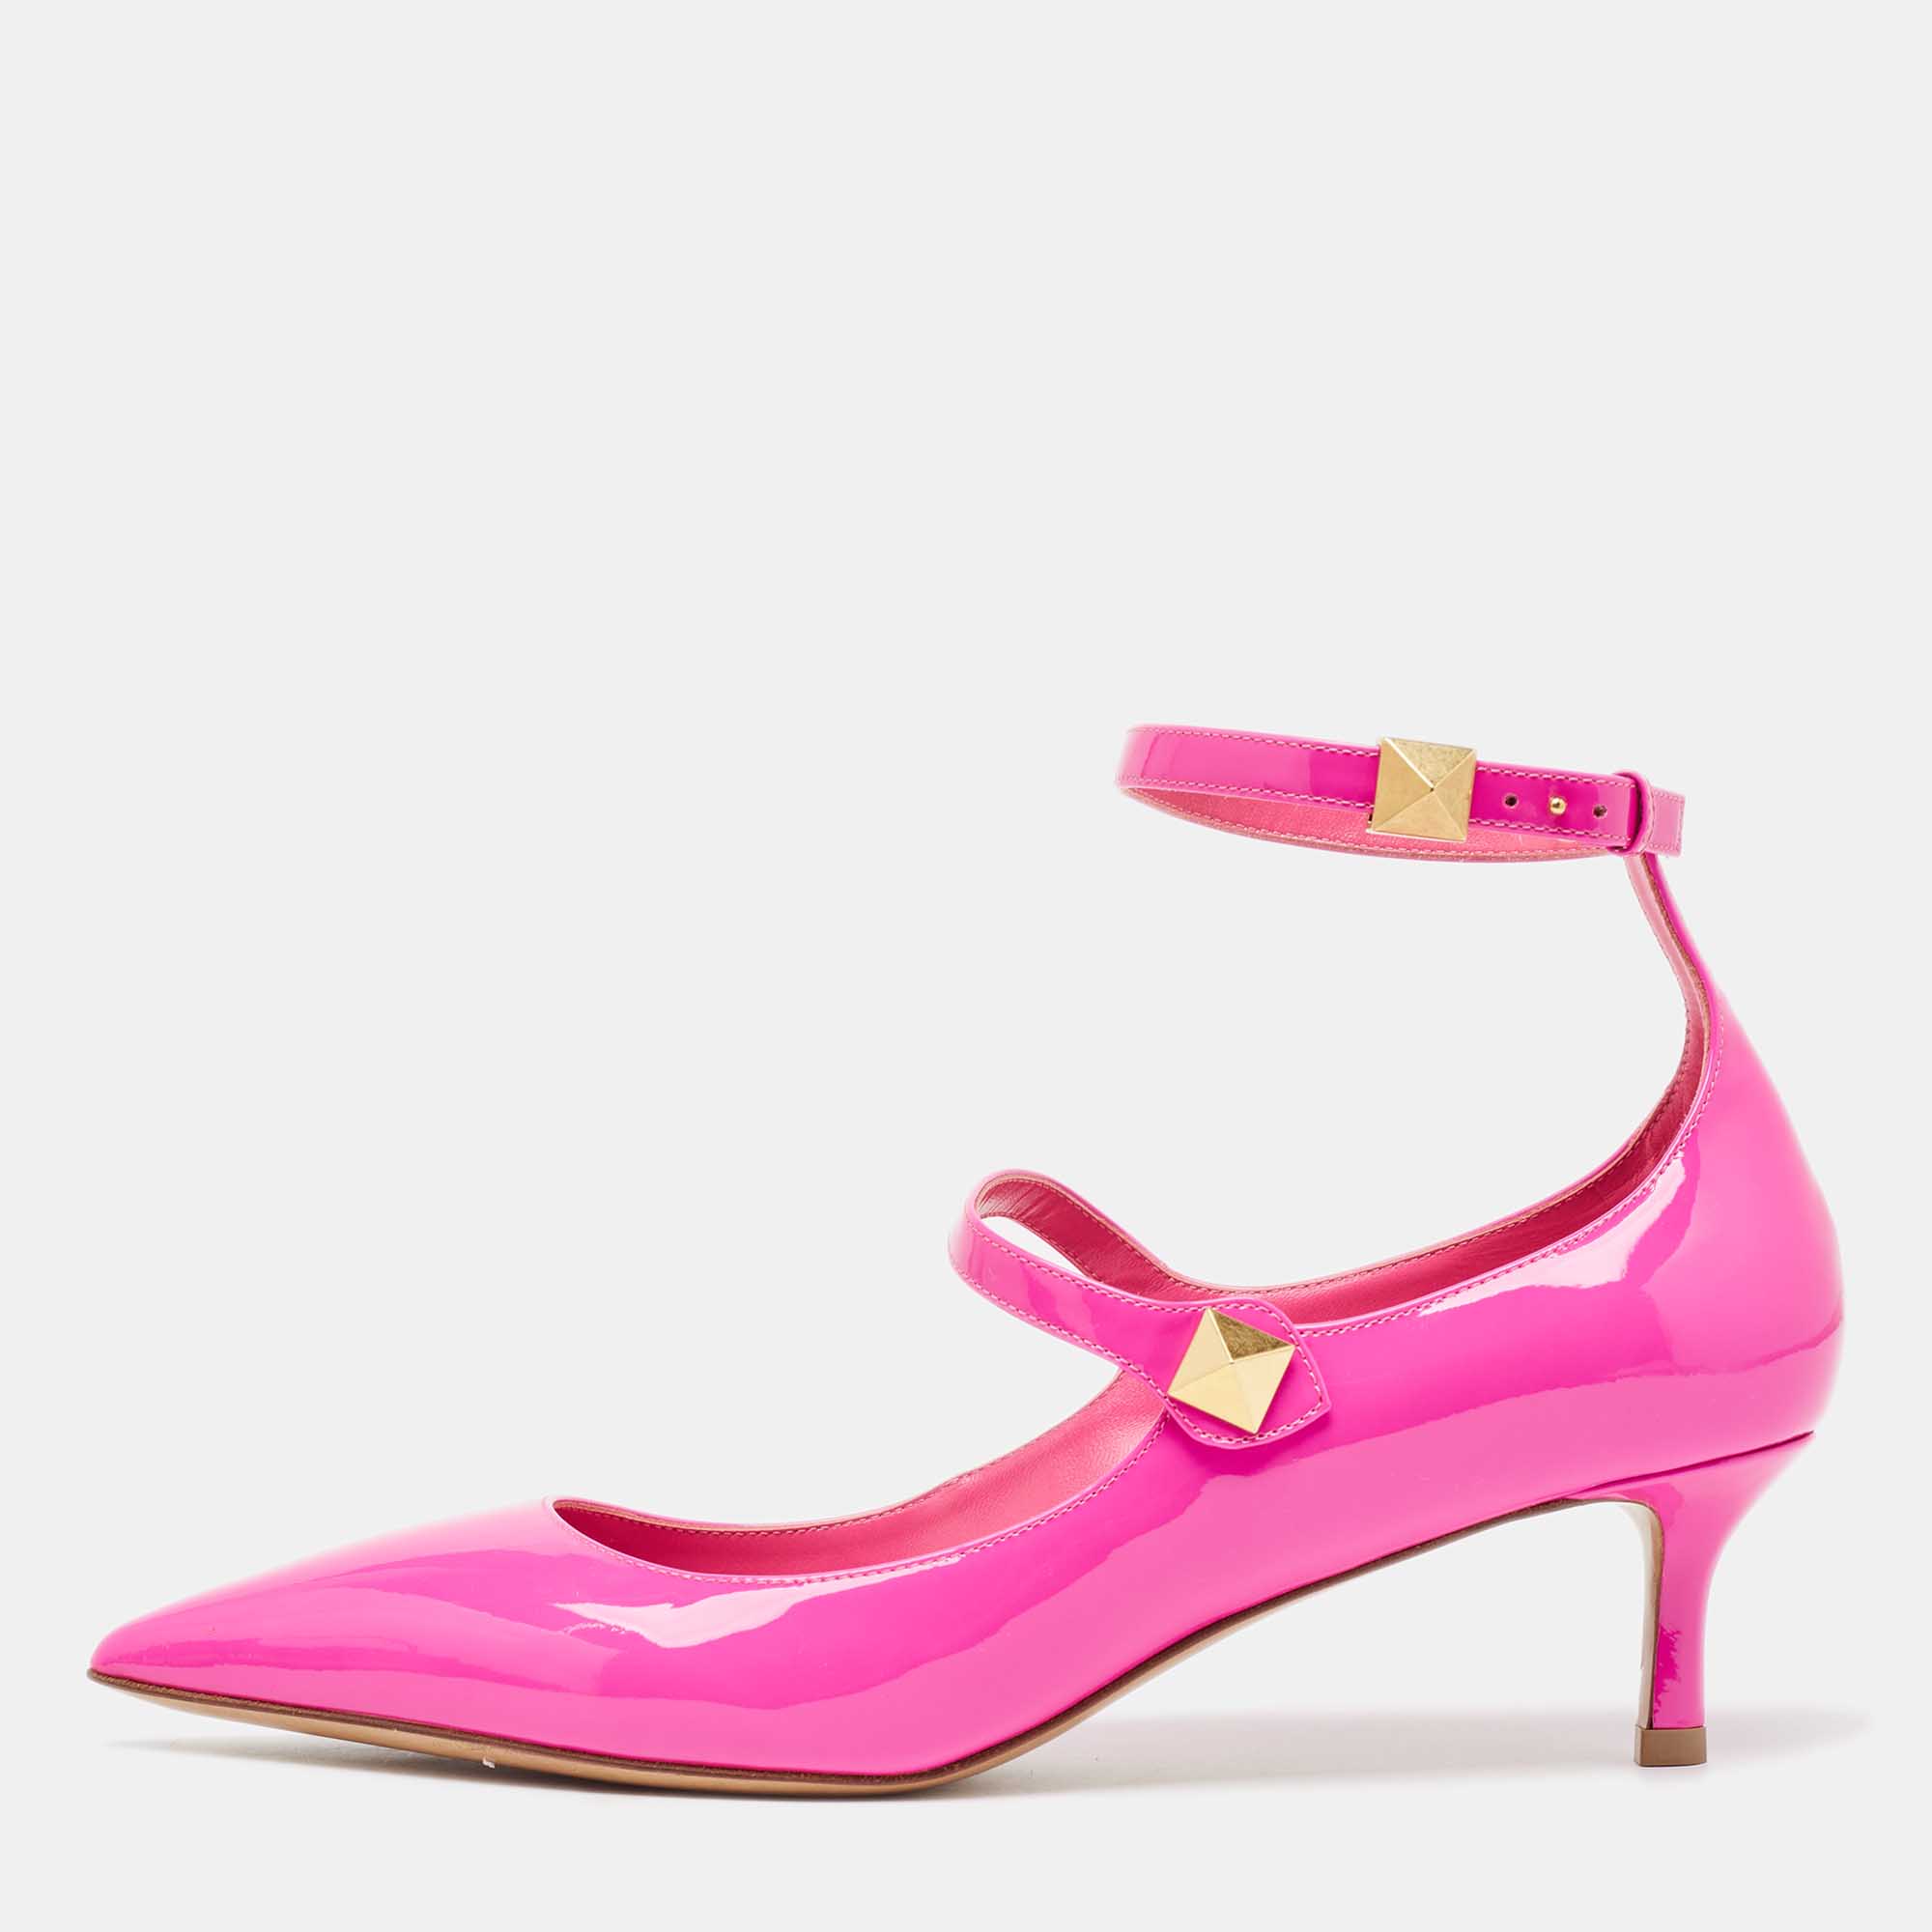 Pre-owned Valentino Garavani Pink Patent Leather Rockstud Ankle Cuff Pointed Toe Pumps Size 40